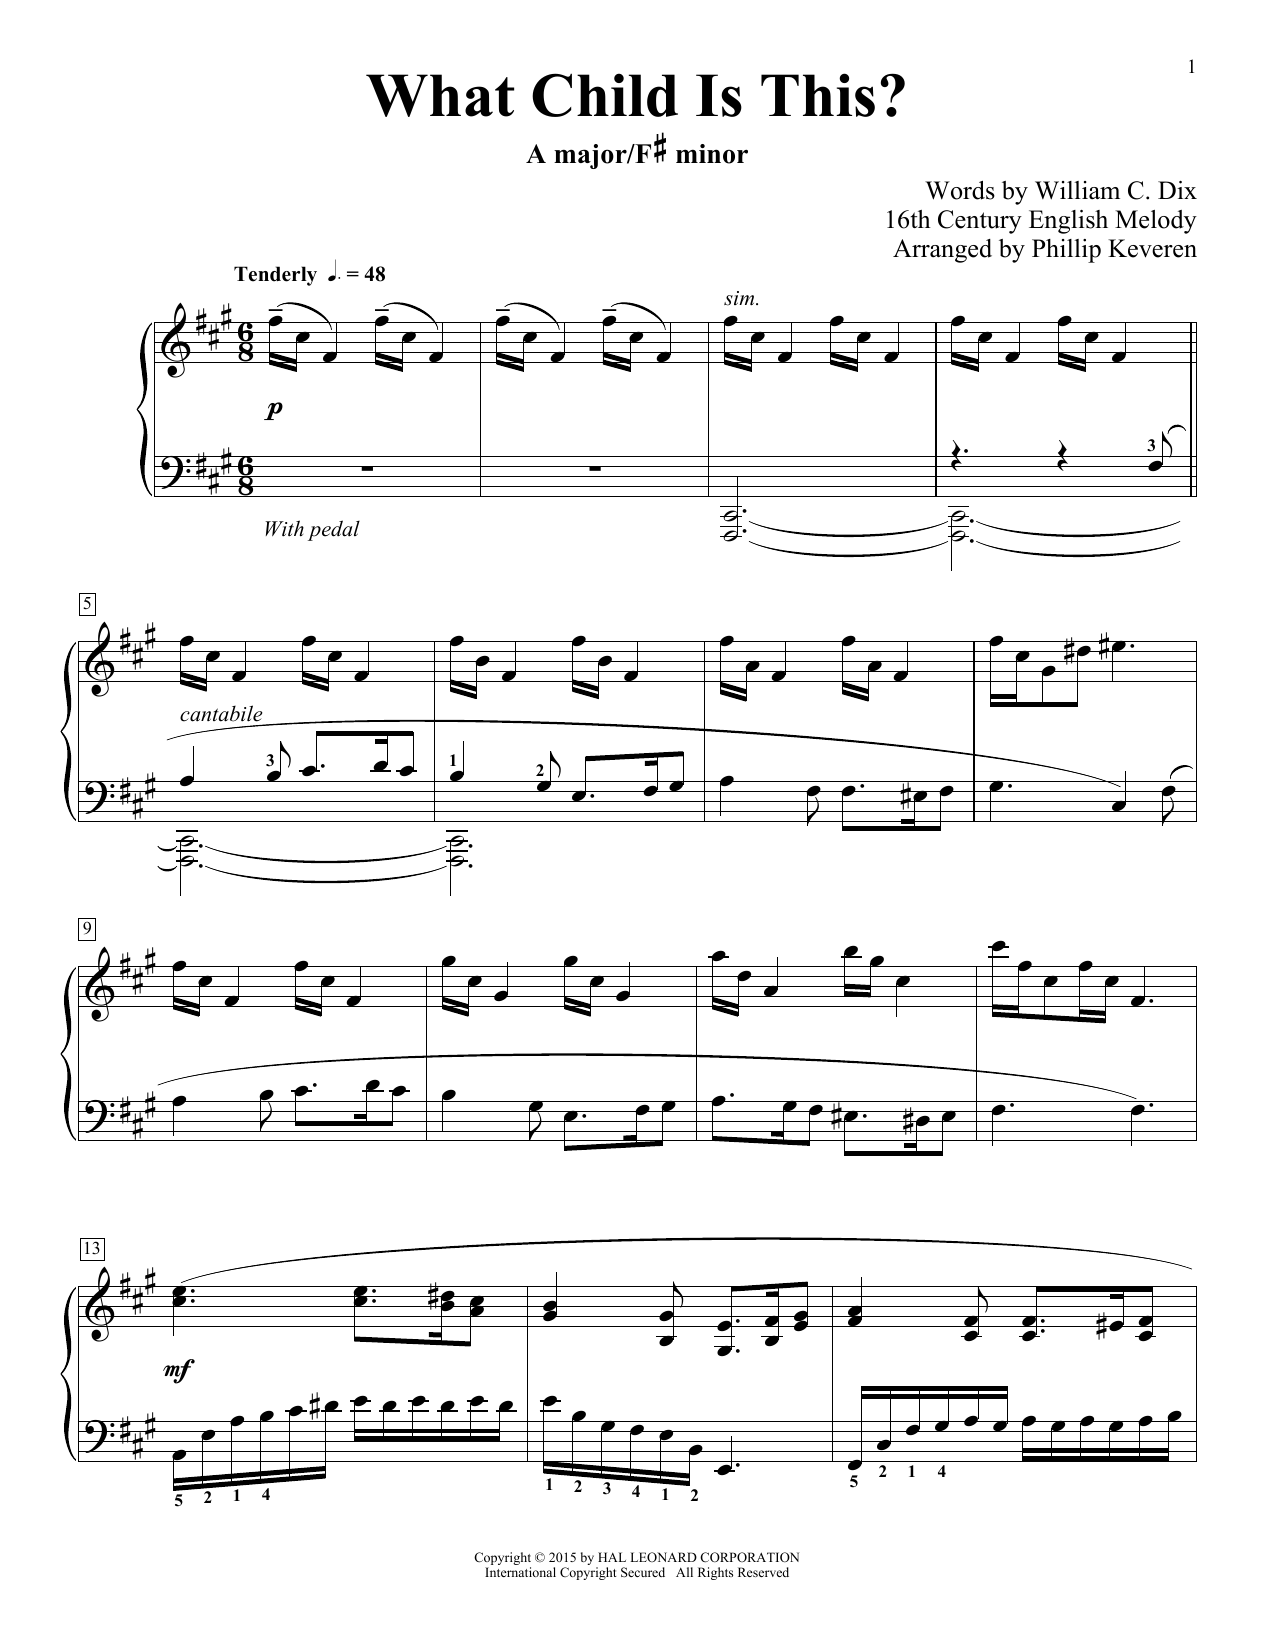 Download Phillip Keveren What Child Is This? Sheet Music